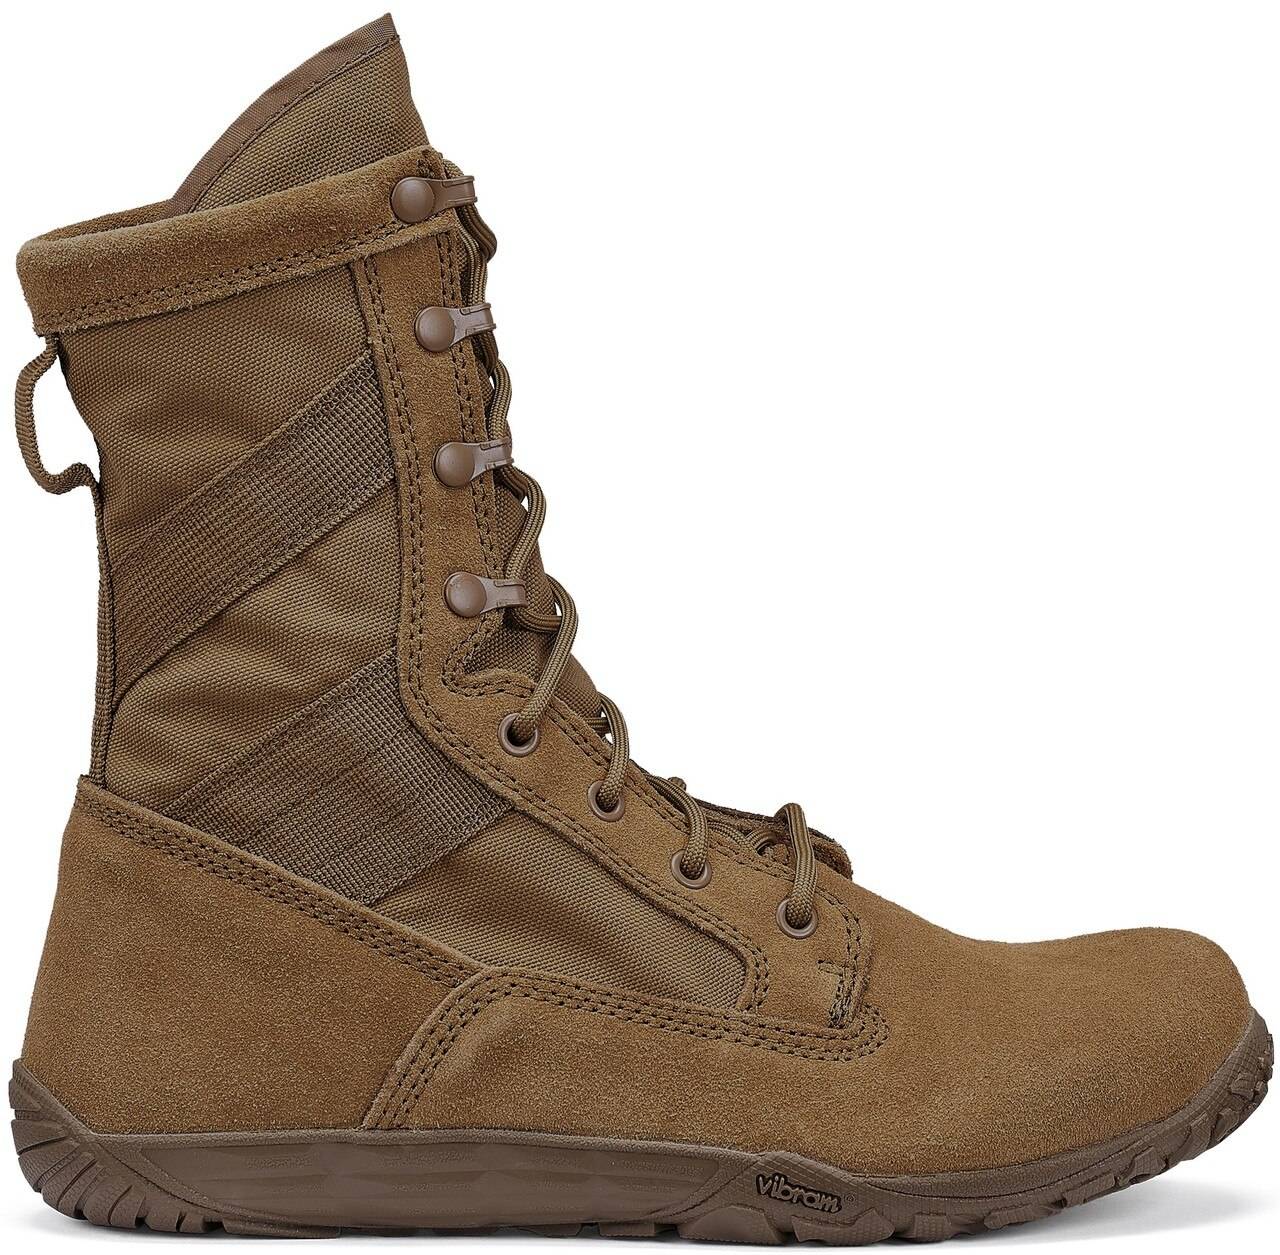 Tactical Research Minimalist AR 670-1 Compliant Training Boot